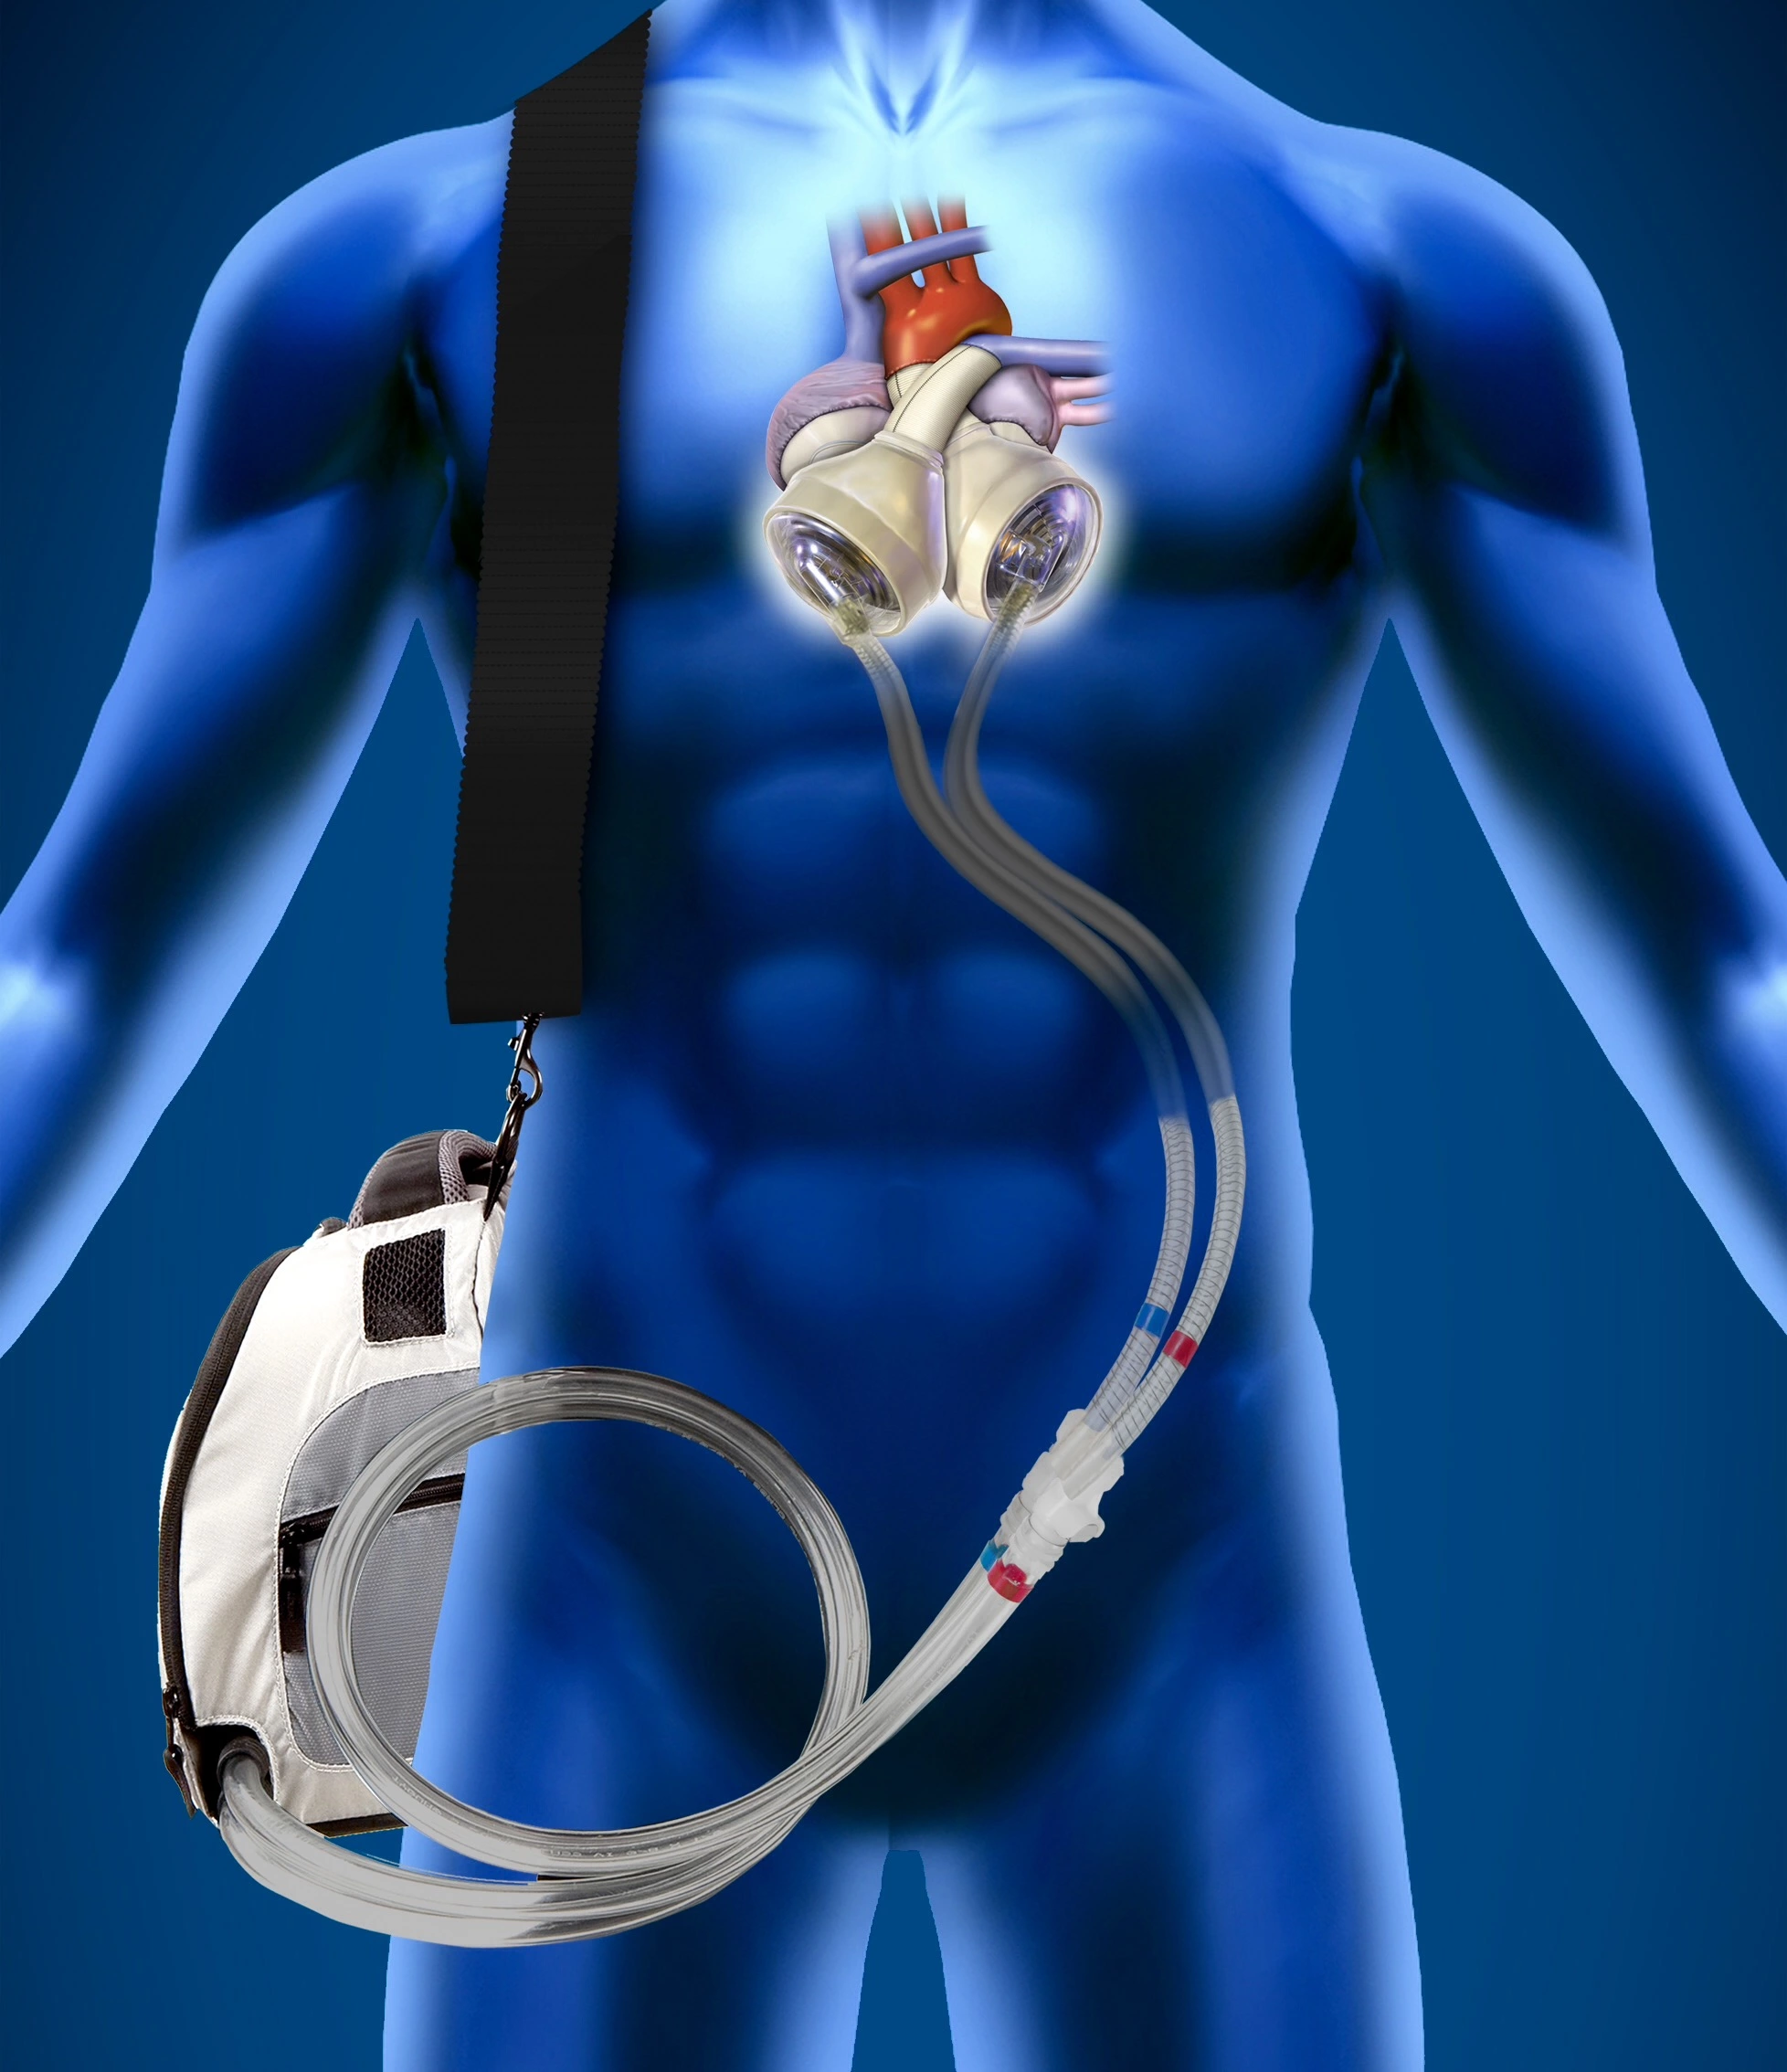 What is an artificial heart?